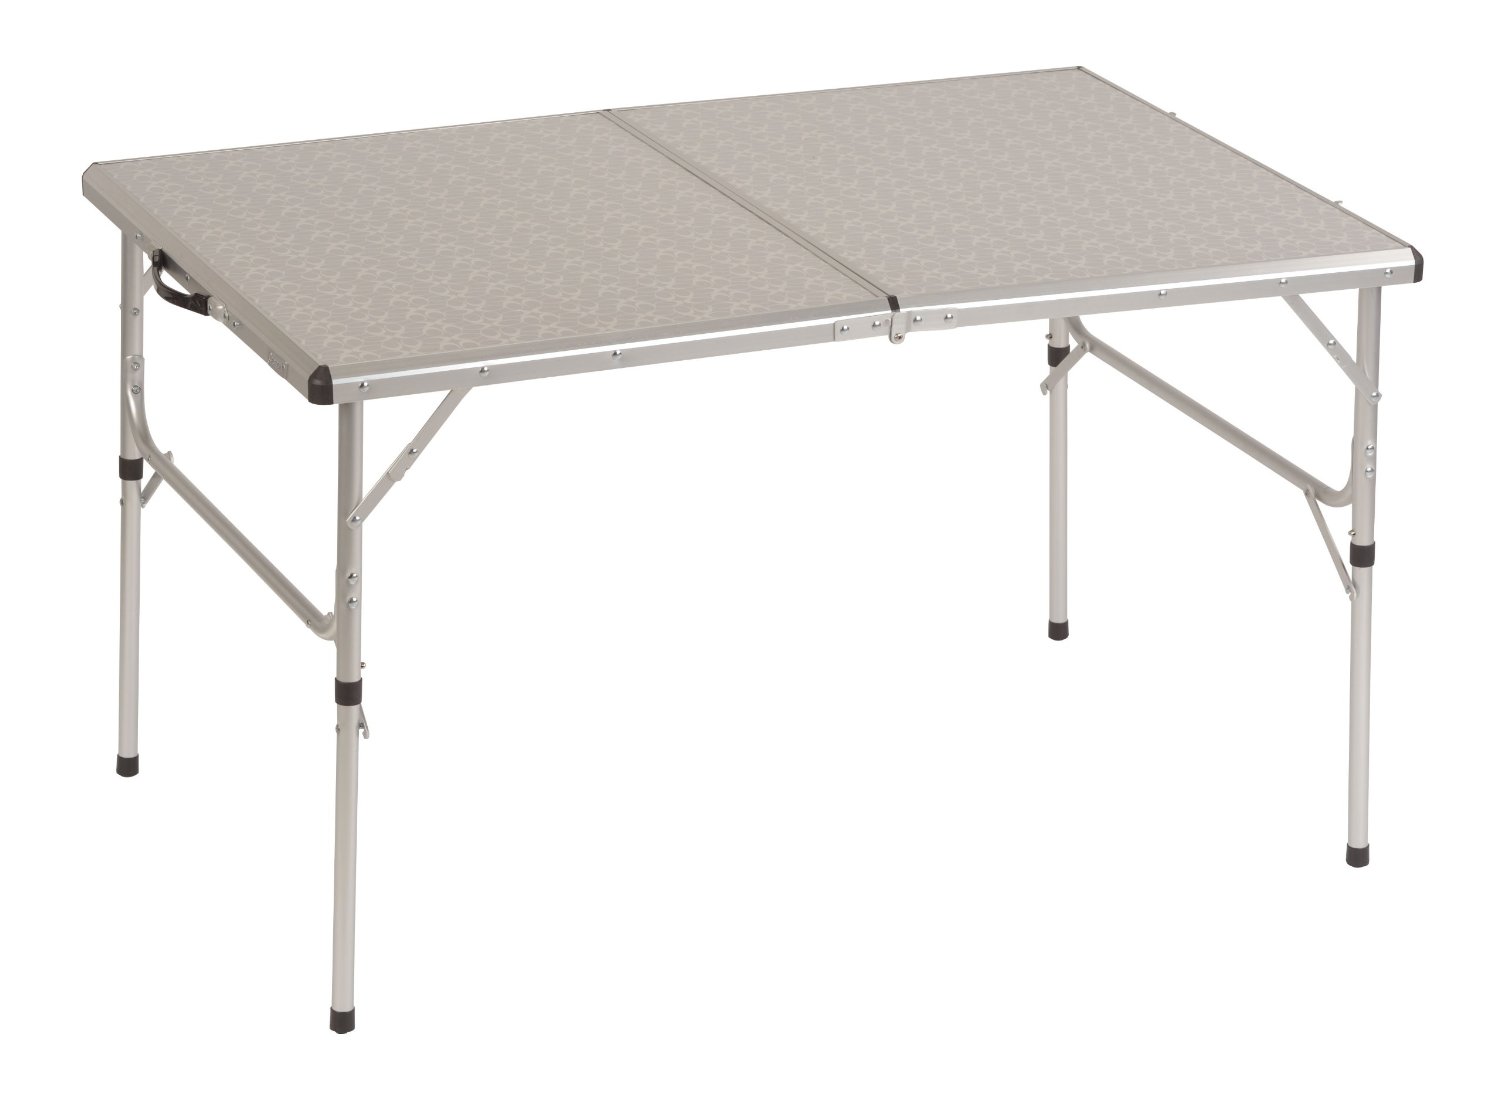 5 Best Folding Camp Table - Great companion for camping - Tool Box